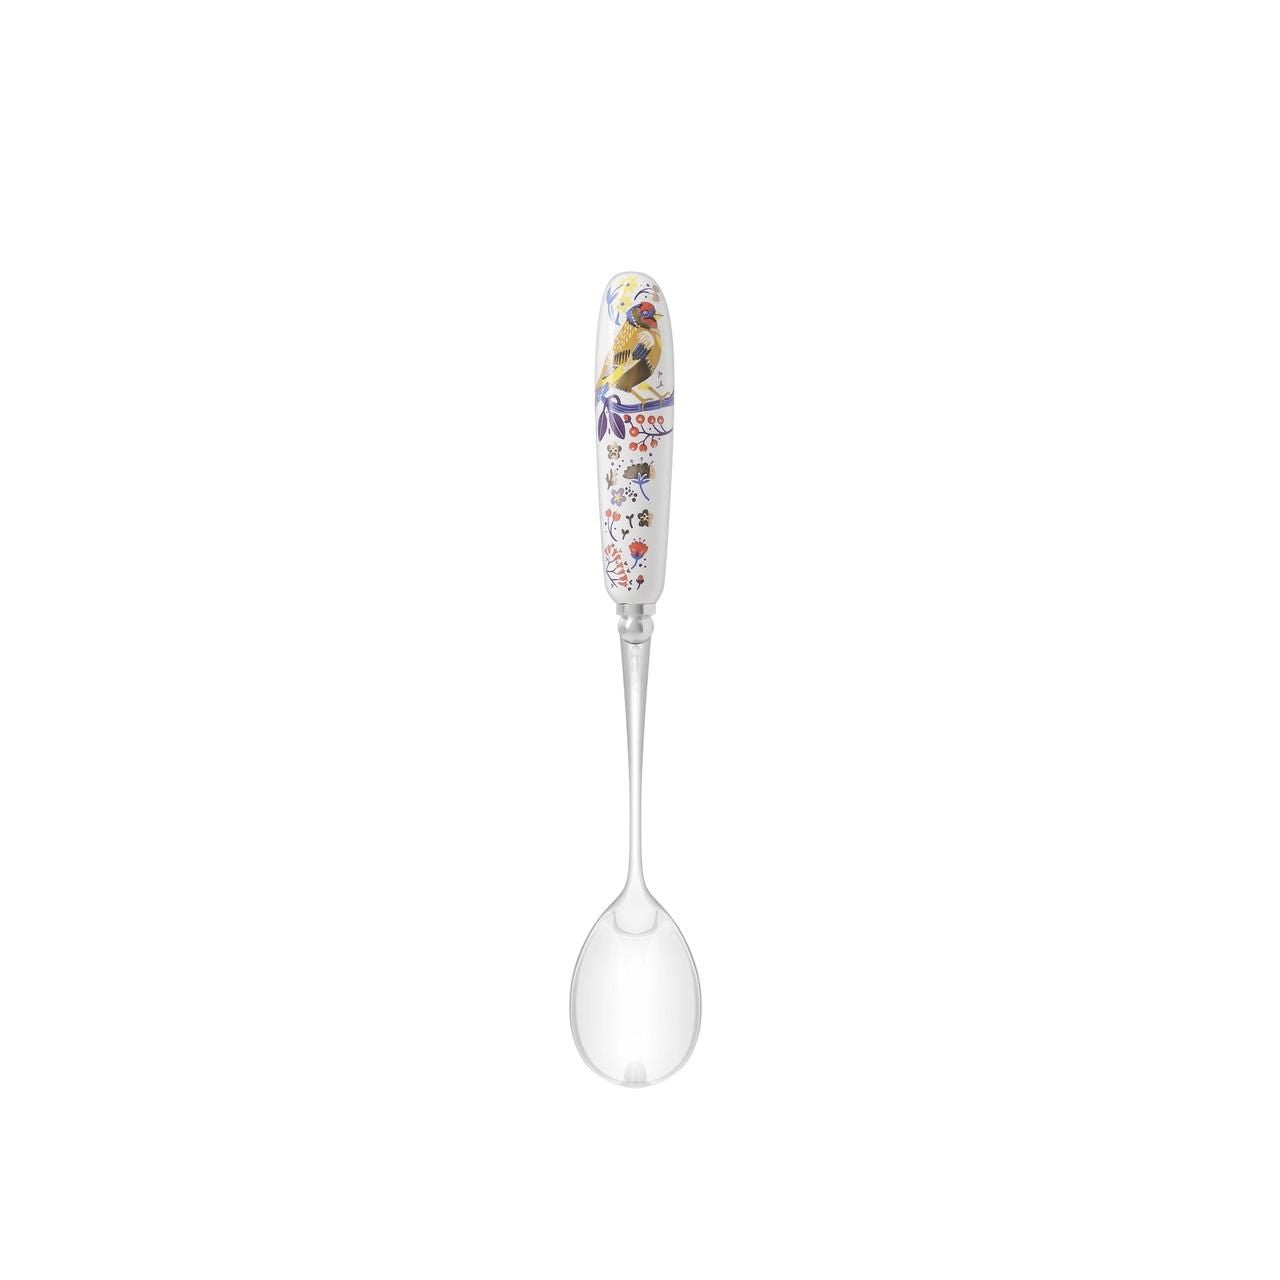 Tipperary Crystal Birdy Dessert Spoons - New 2022  New to our collection, these birdy desert spoons come beautifully illustrated and presented in a rigid Tipperary Crystal gift box. Makes a wonderful gift to be enjoyed.  The Birdy Collection is a series of 6 exclusively commissioned illustrations inspired by native Irish birds; Bullfinch, Goldfinch, Blue tit, Greenfinch, Kingfisher and Robin.